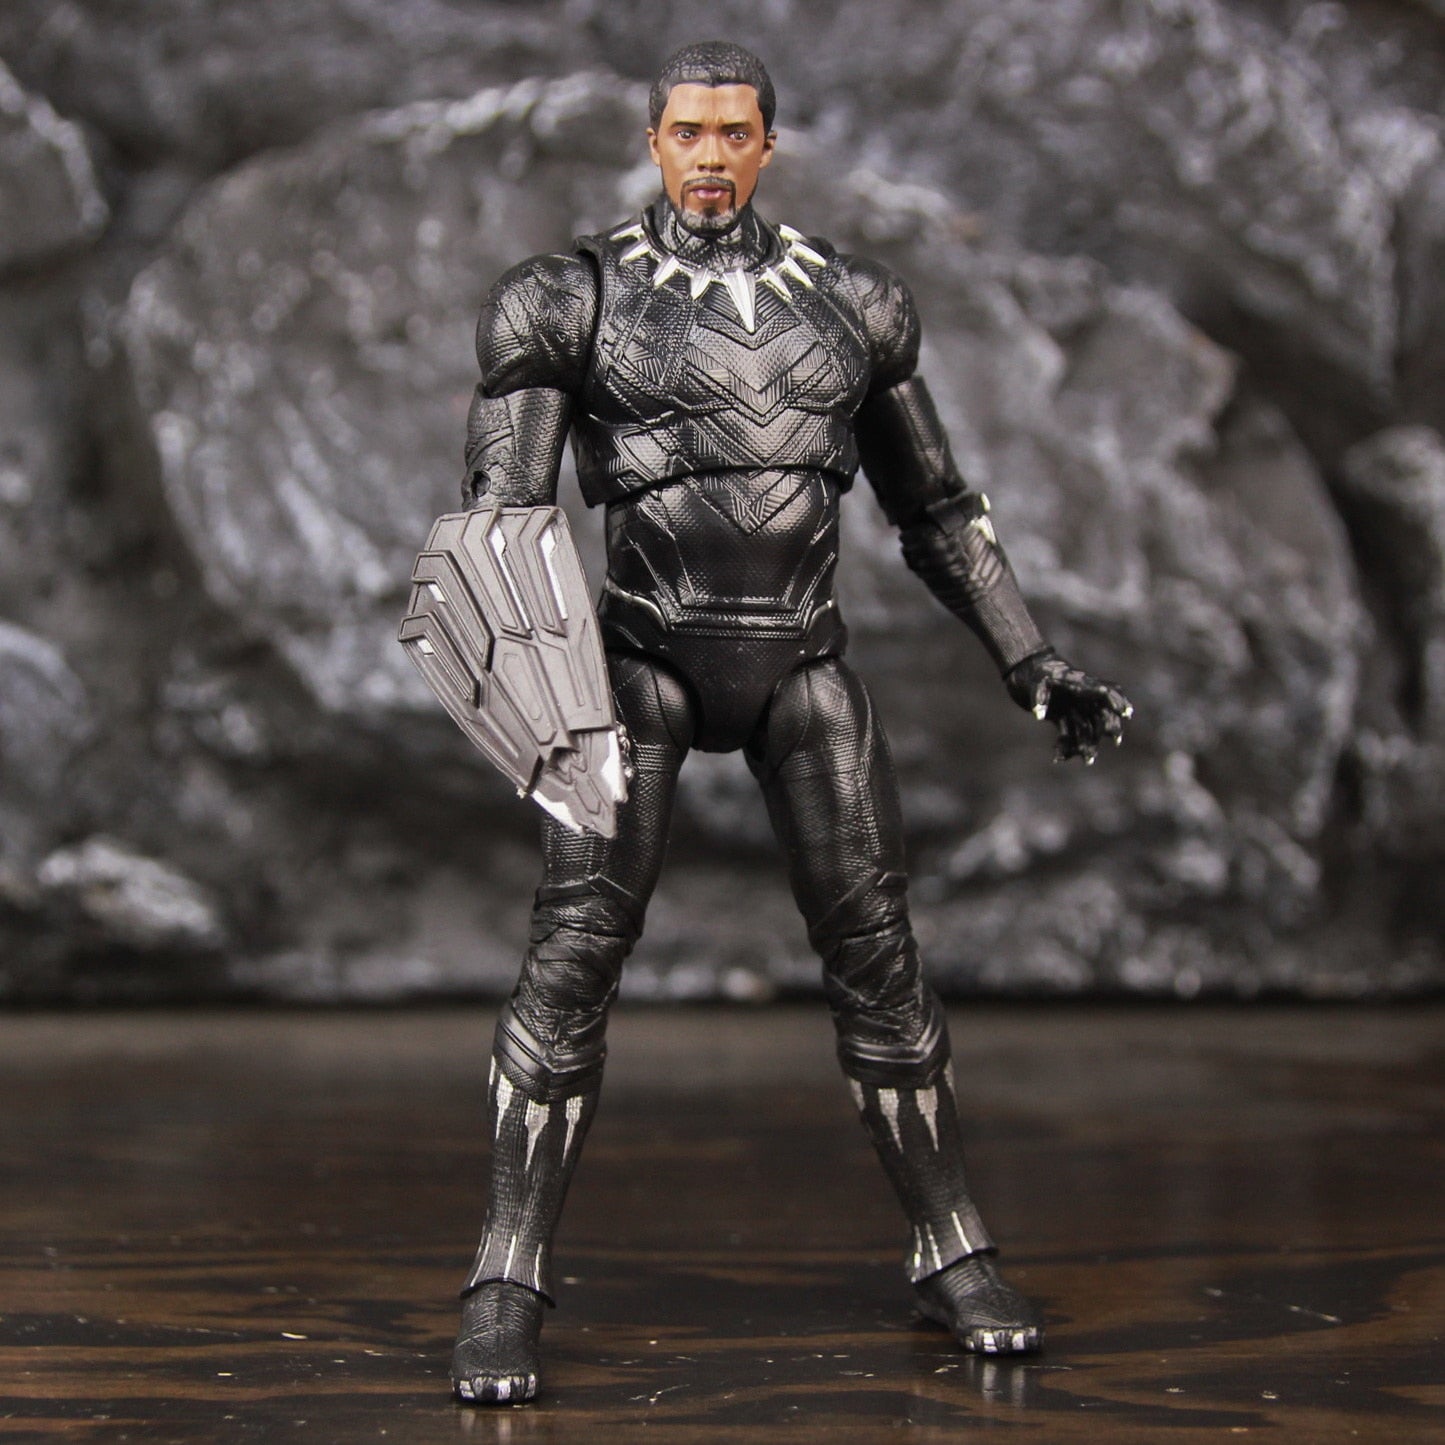 ZD Toys Marvel Black Panther 7" Action Figure - The King Of Wakanda Collection